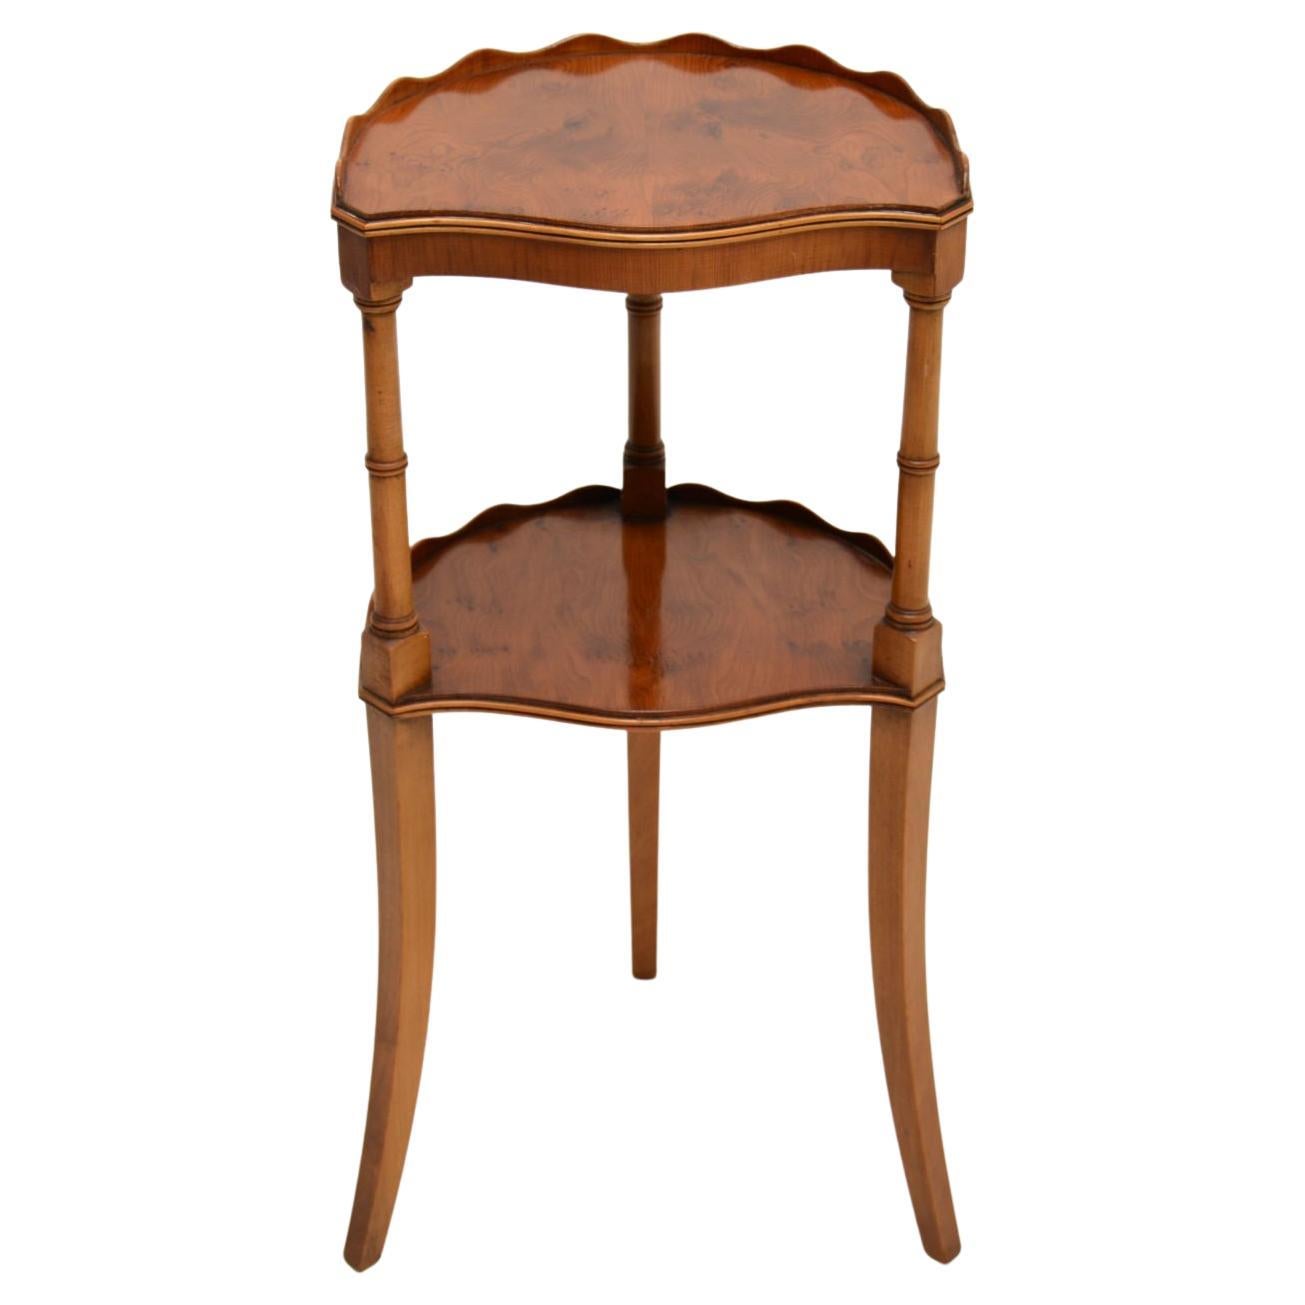 Antique Regency Style Yew Wood Side Table